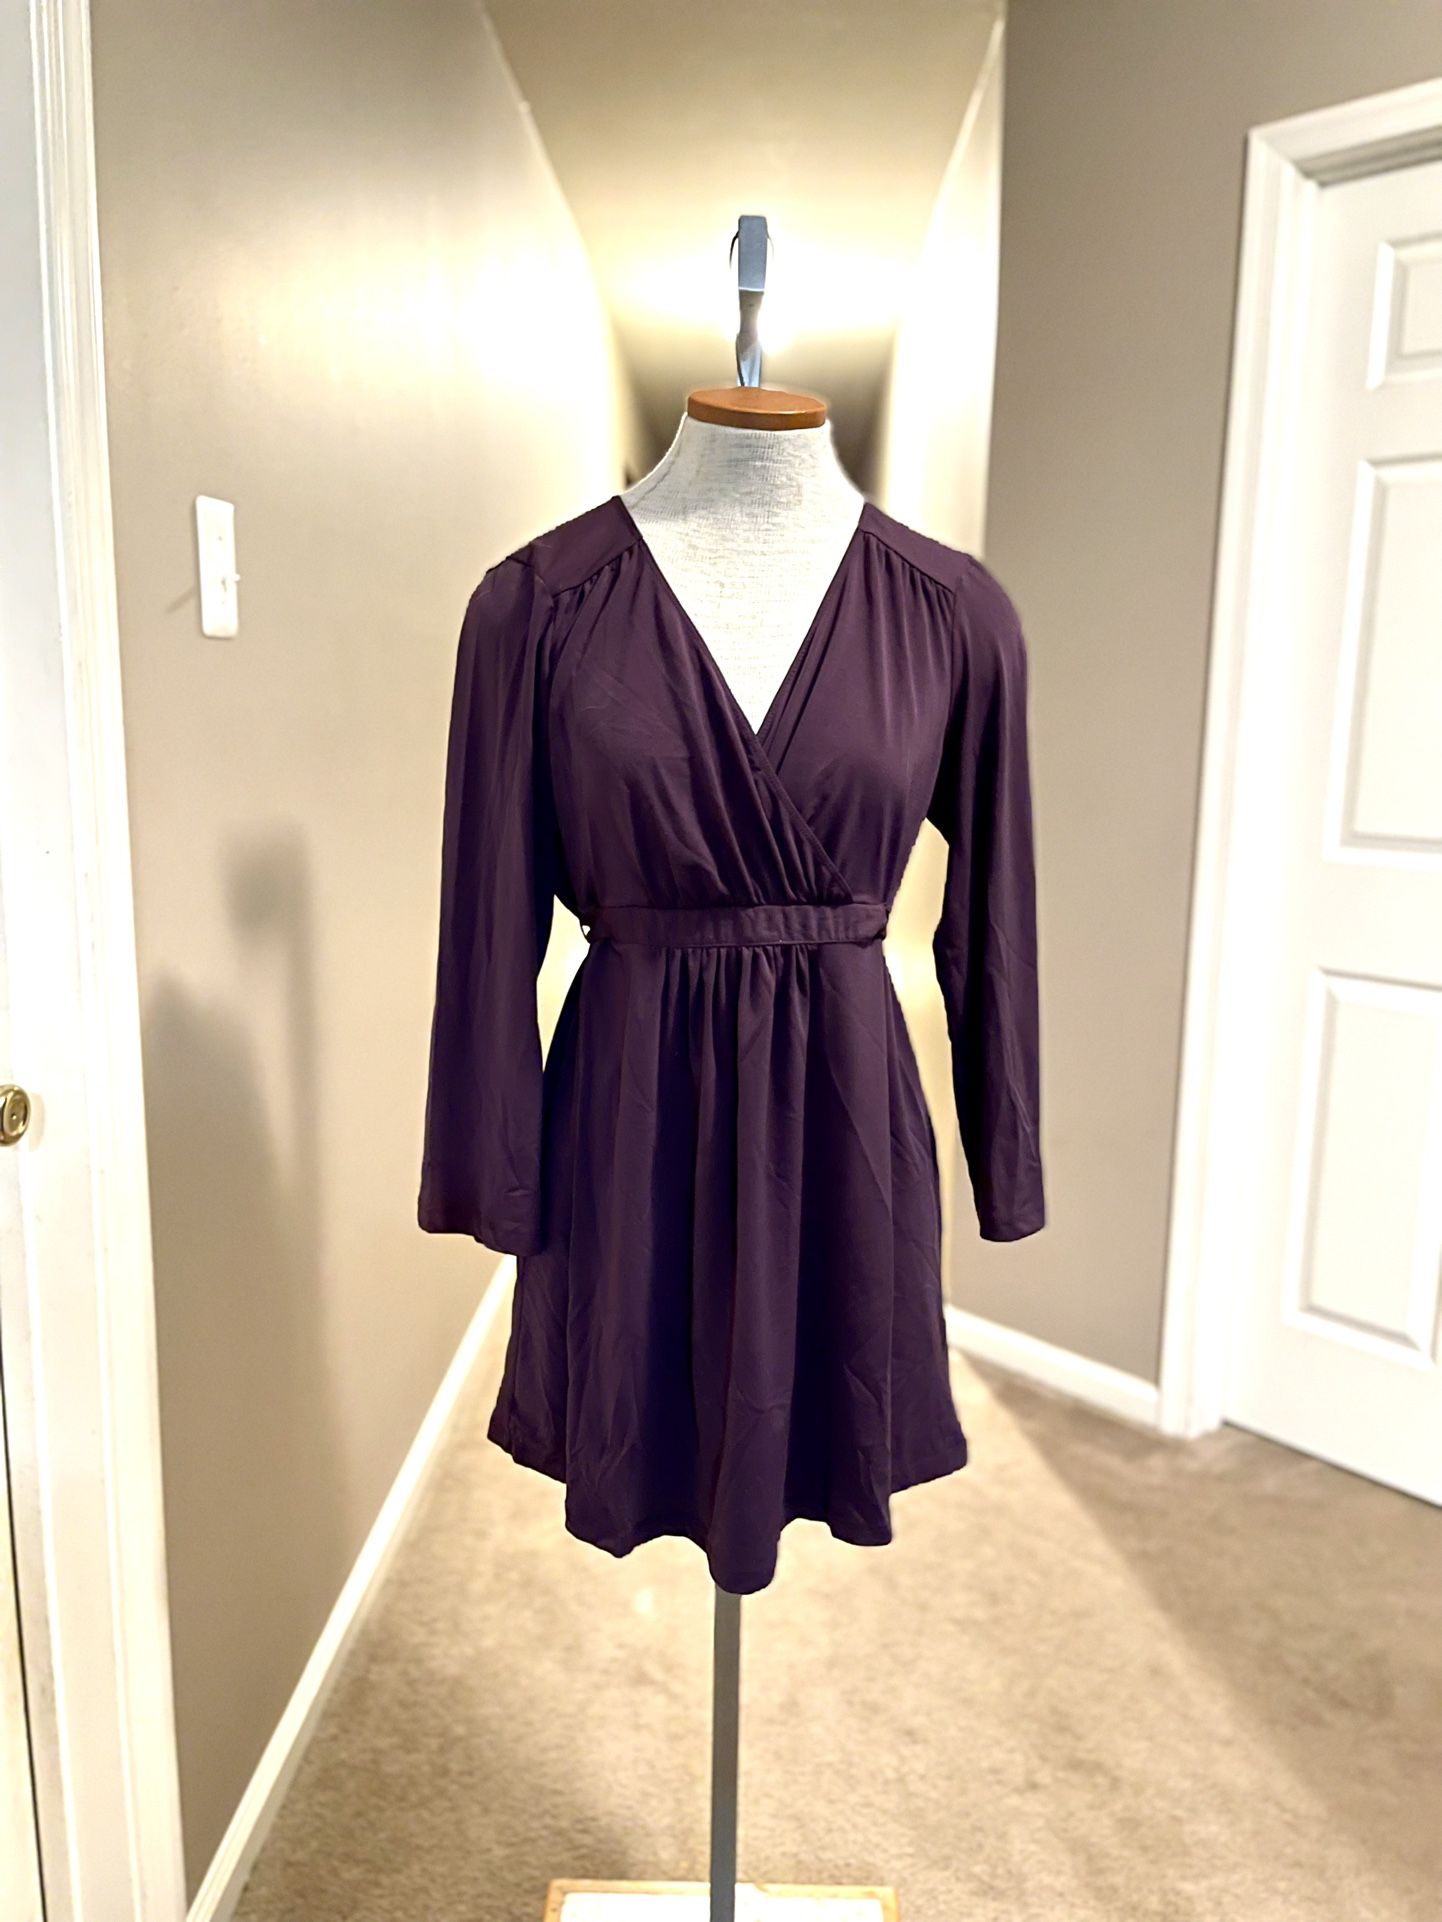 NWOT Maternity Top/short dress? In Purple Size Large By Oh Baby By Motherhood. Criss cross in front with tie in back. 